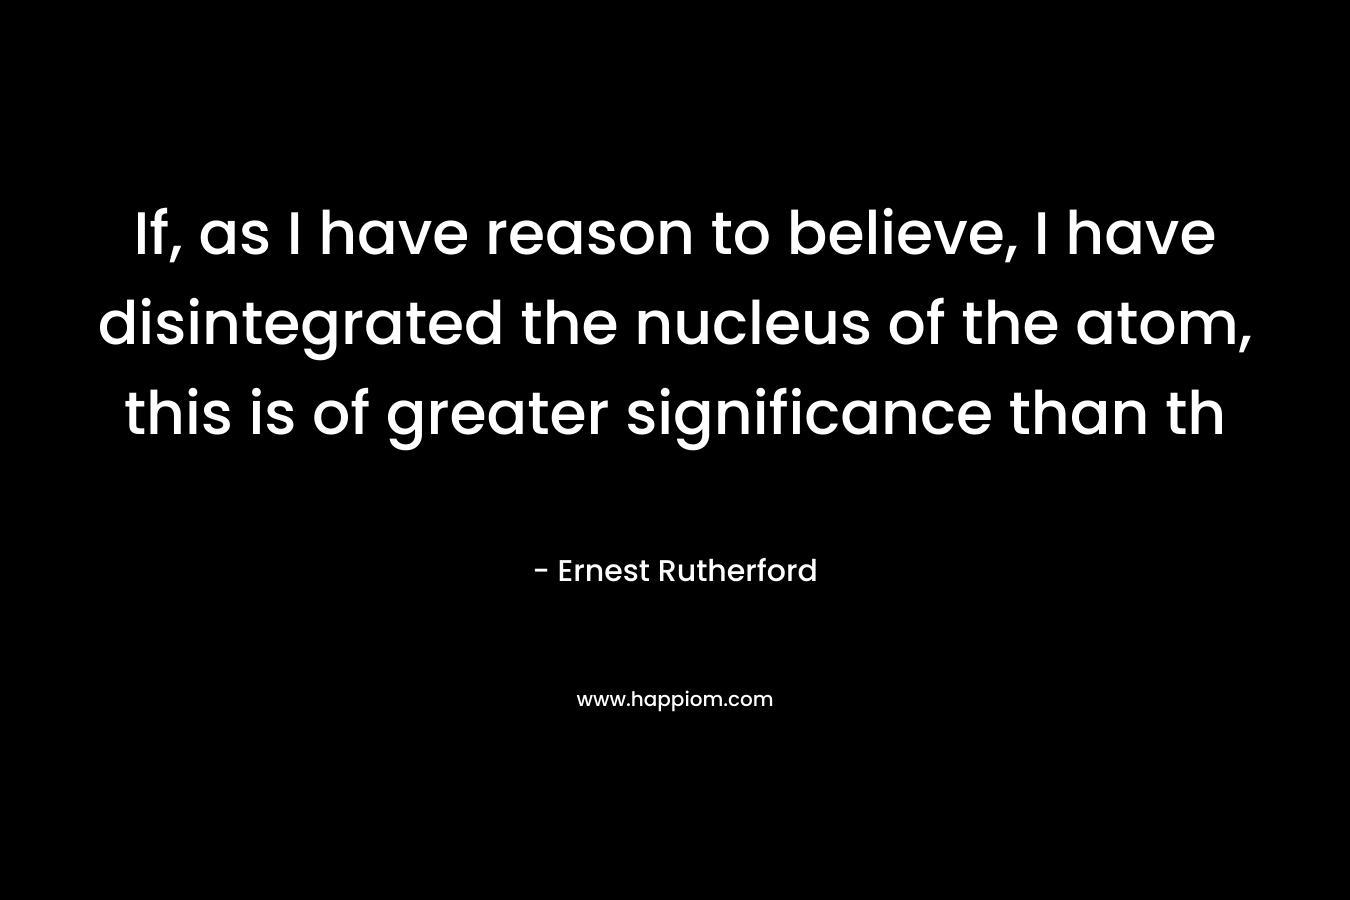 If, as I have reason to believe, I have disintegrated the nucleus of the atom, this is of greater significance than th